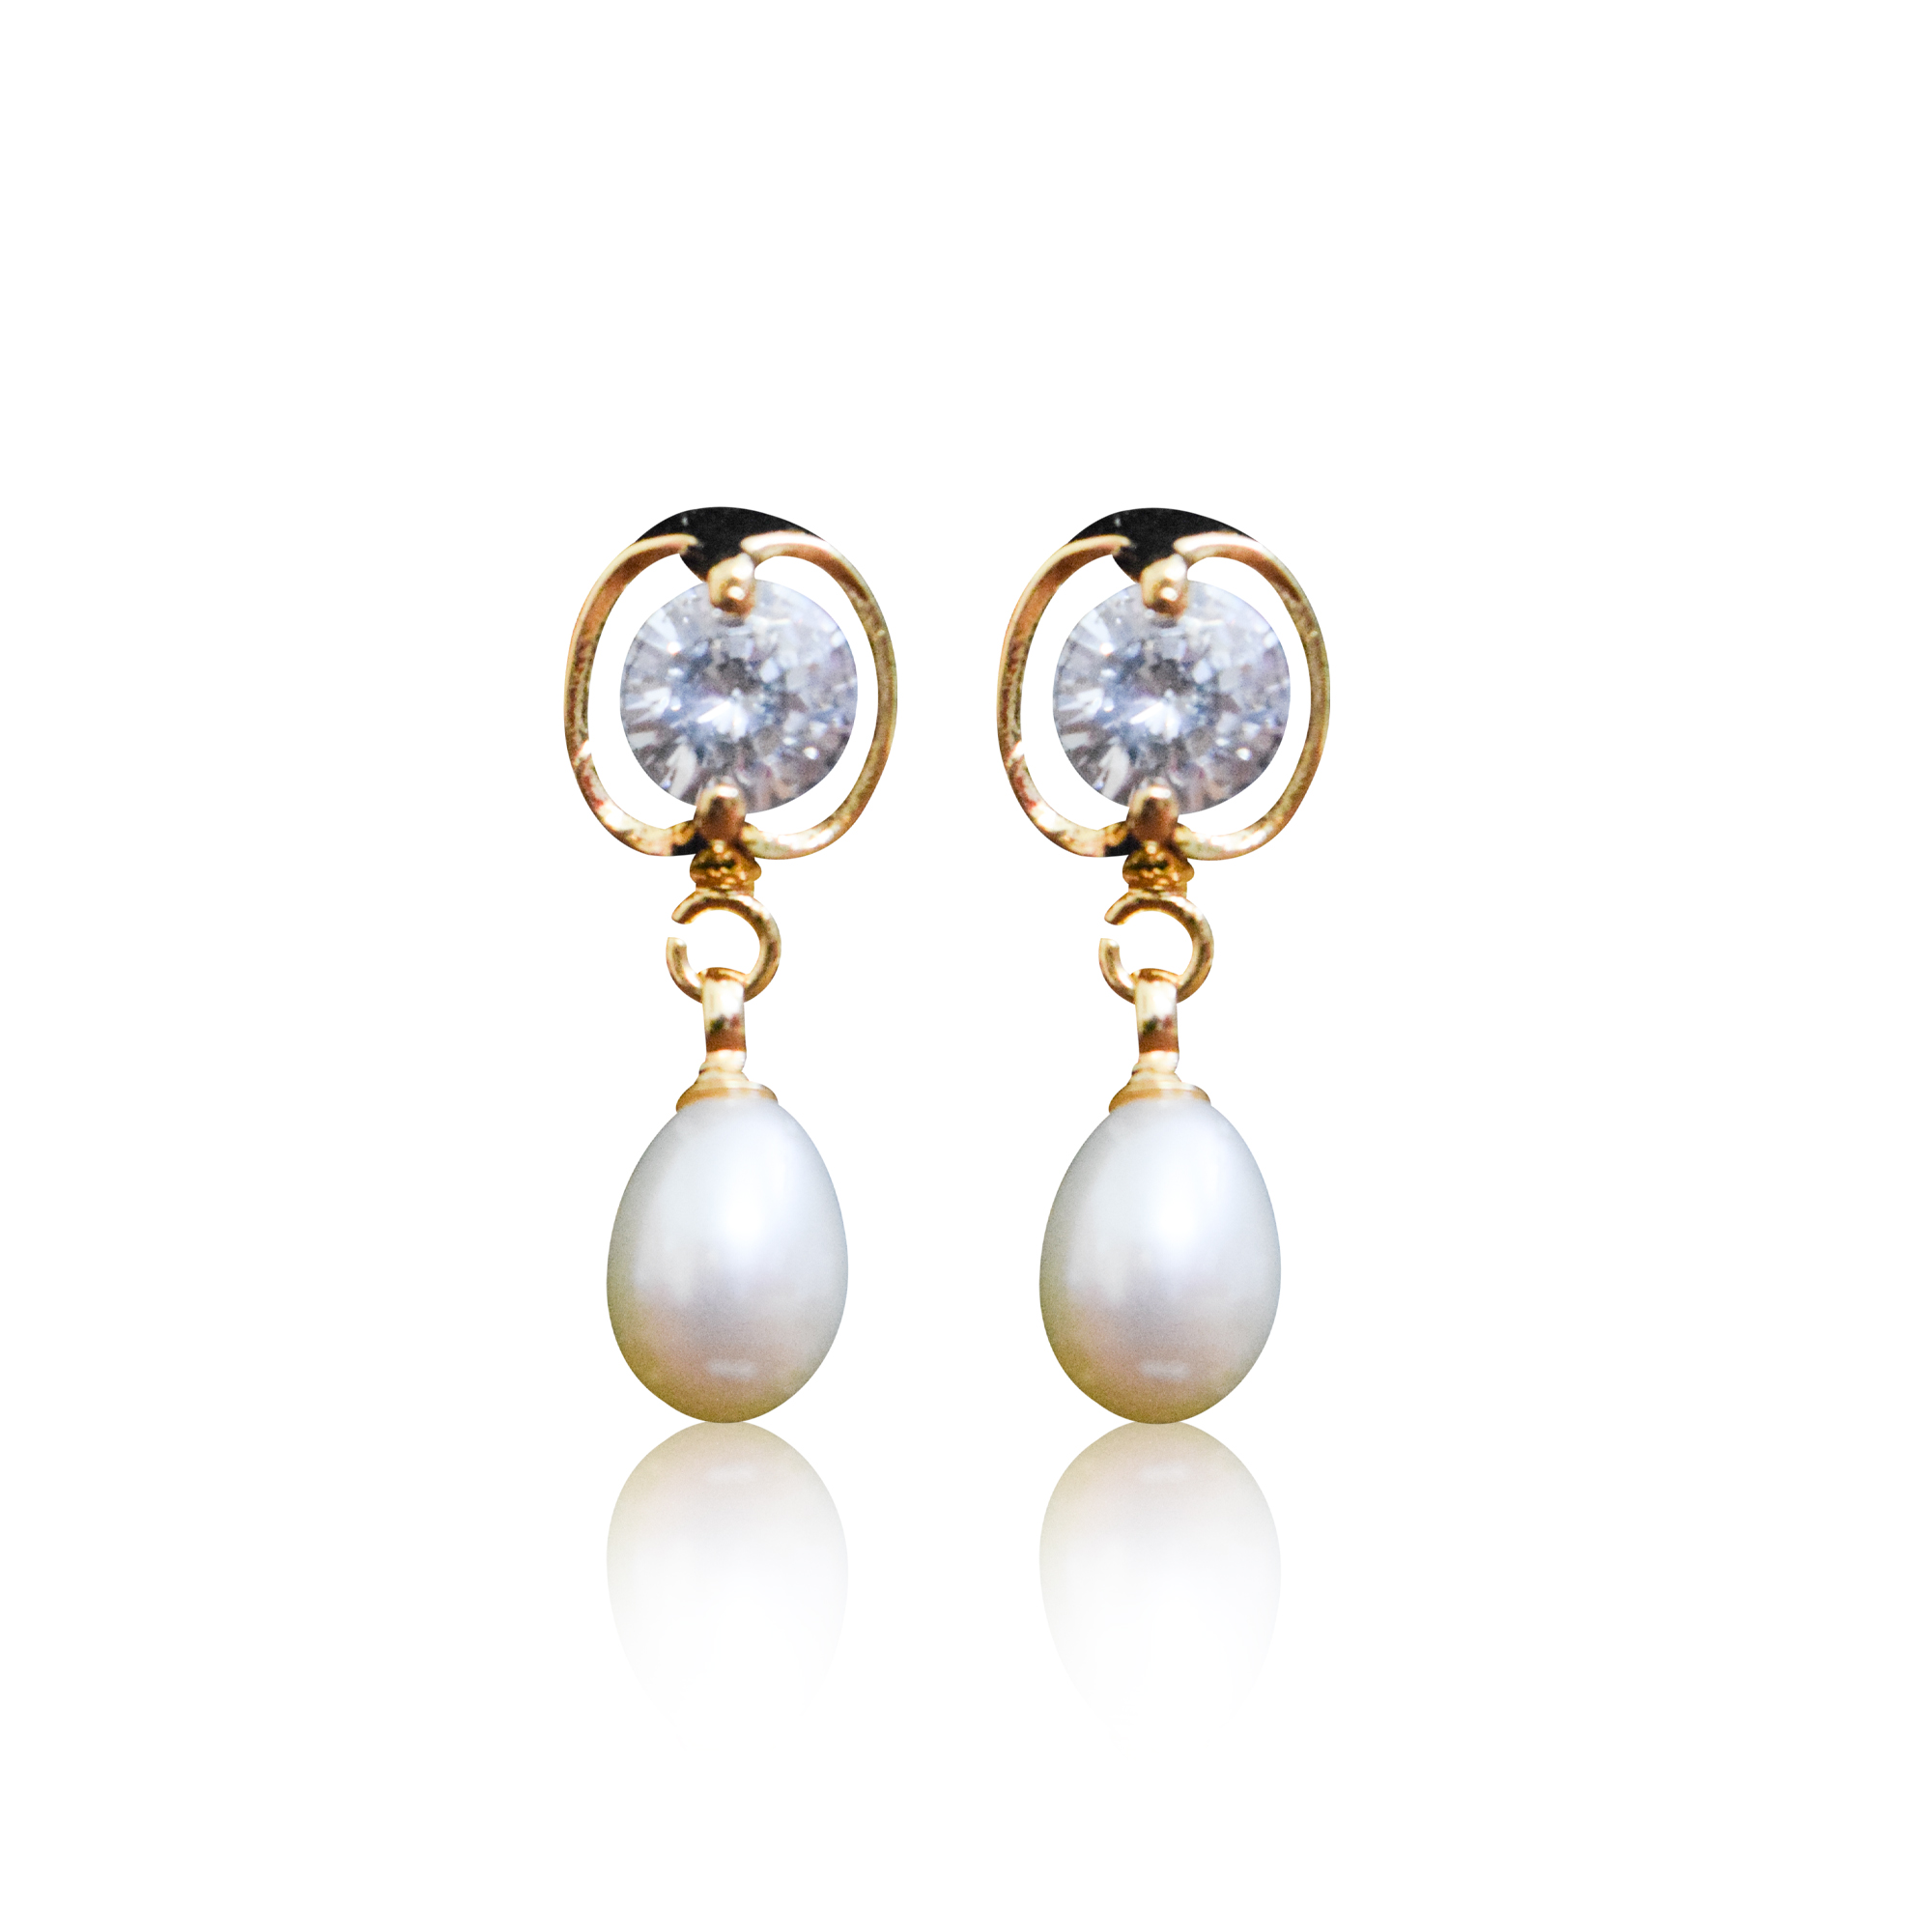 Magnificent White Oval Pearl Drops With Shiny AD Studs - Pure Pearls